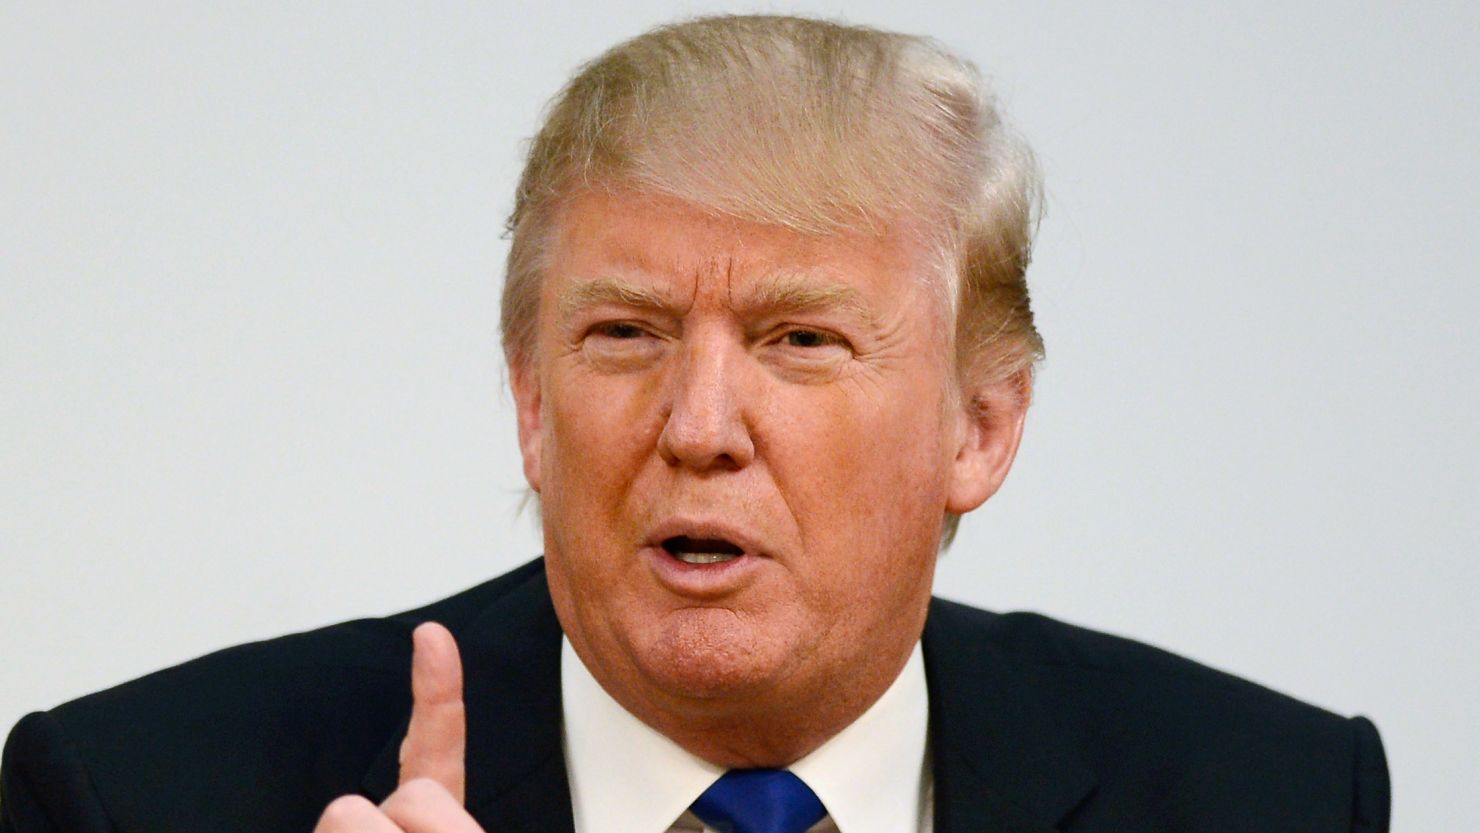 Donald Trump appeared in the Scottish parliament in April to oppose the offshore wind farm.